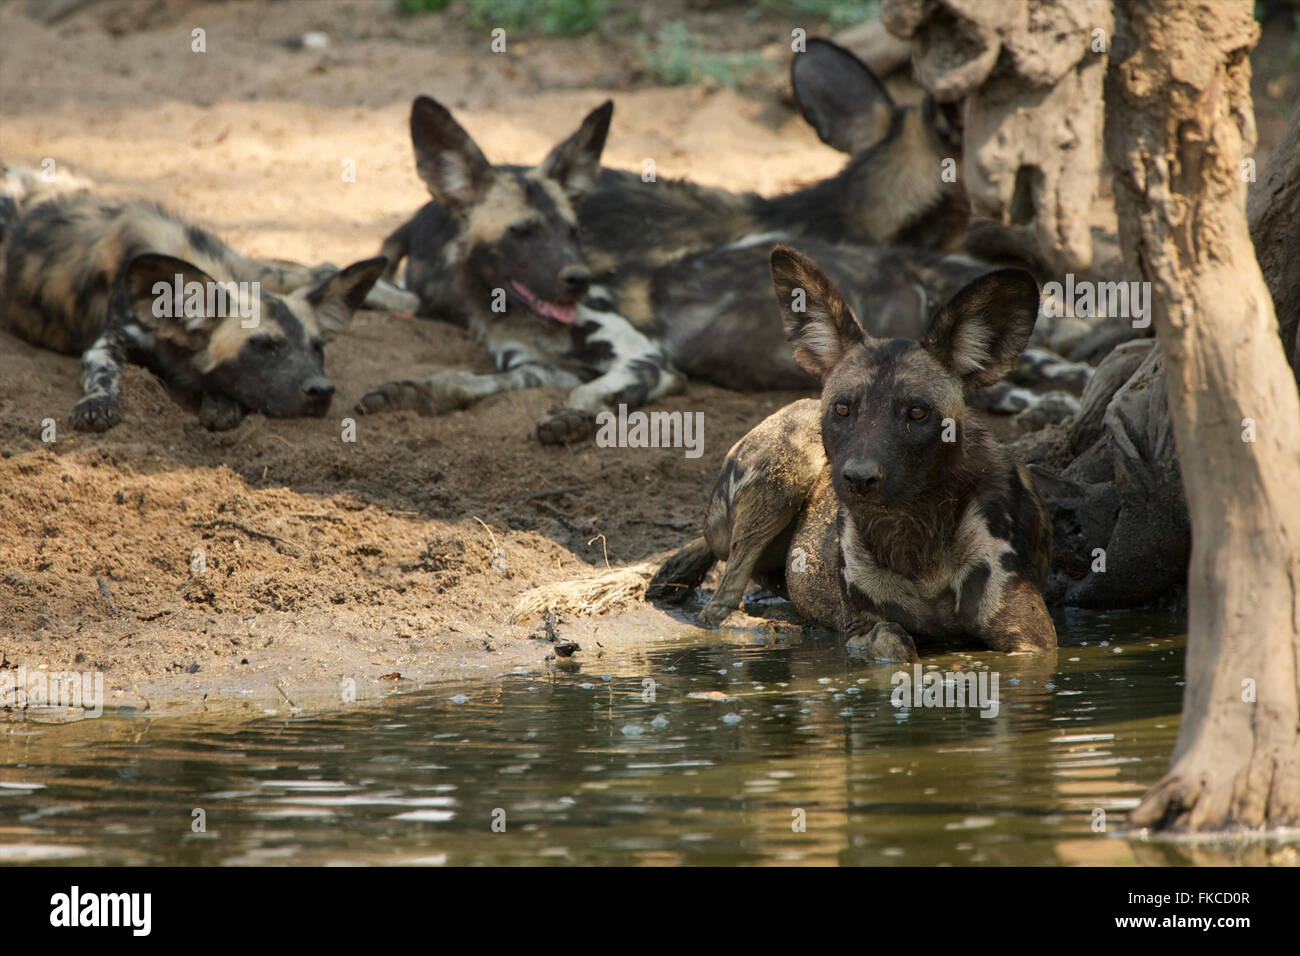 African wild dogs resting in the shade near stagnant water, Mana Pools, Zimbabwe Stock Photo